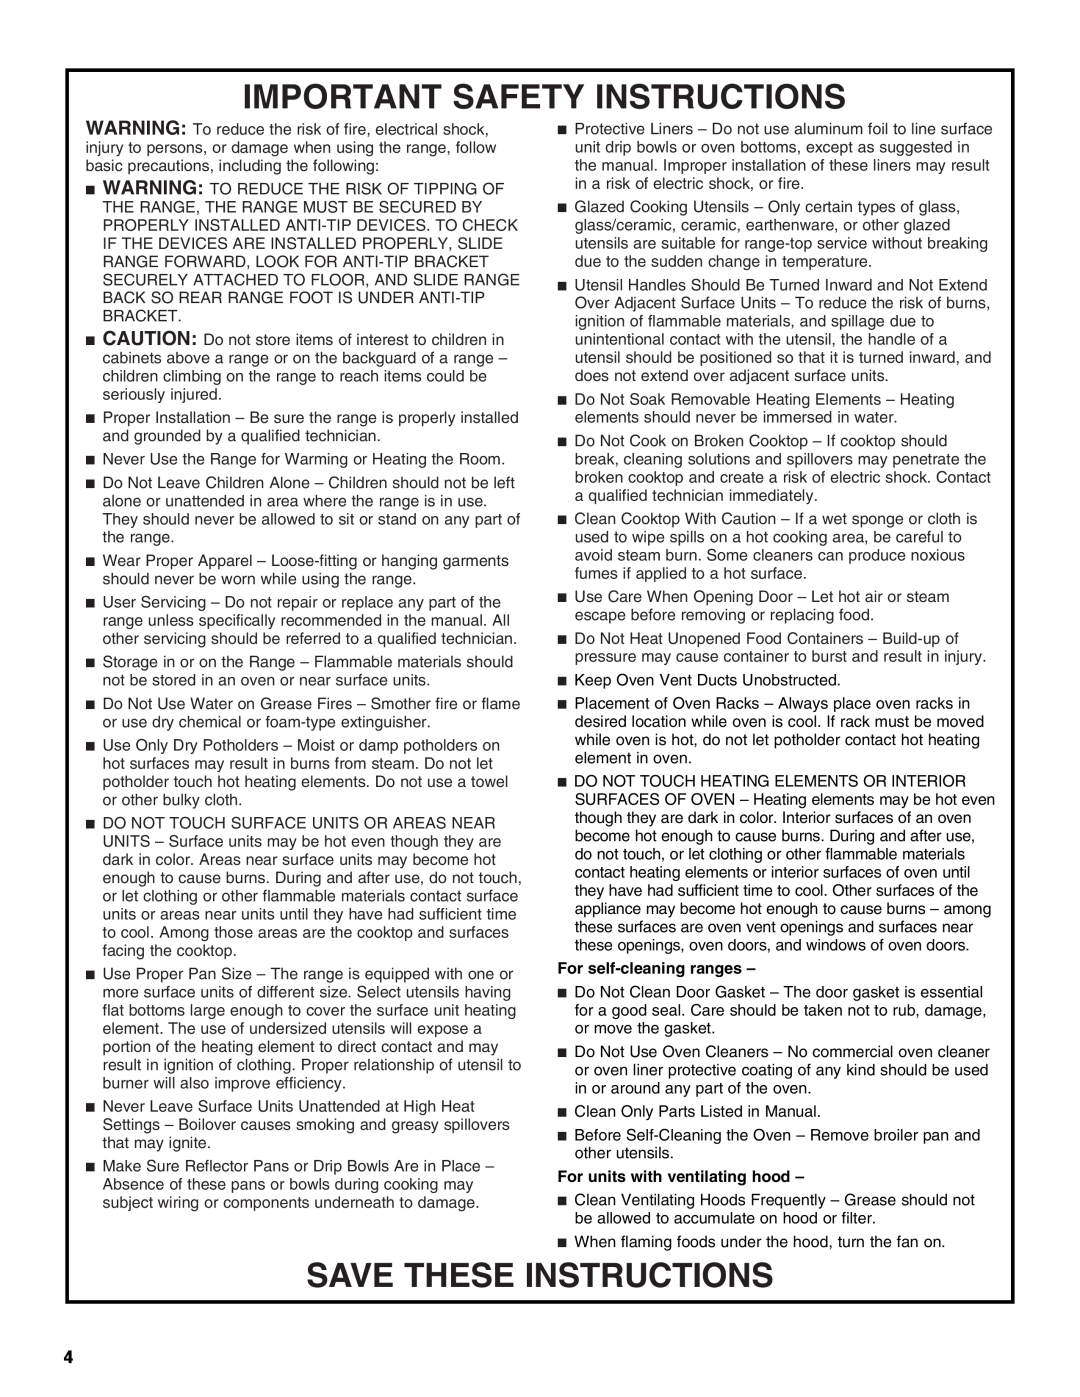 Whirlpool TES326RD0 manual Important Safety Instructions, Save These Instructions, For self-cleaningranges 